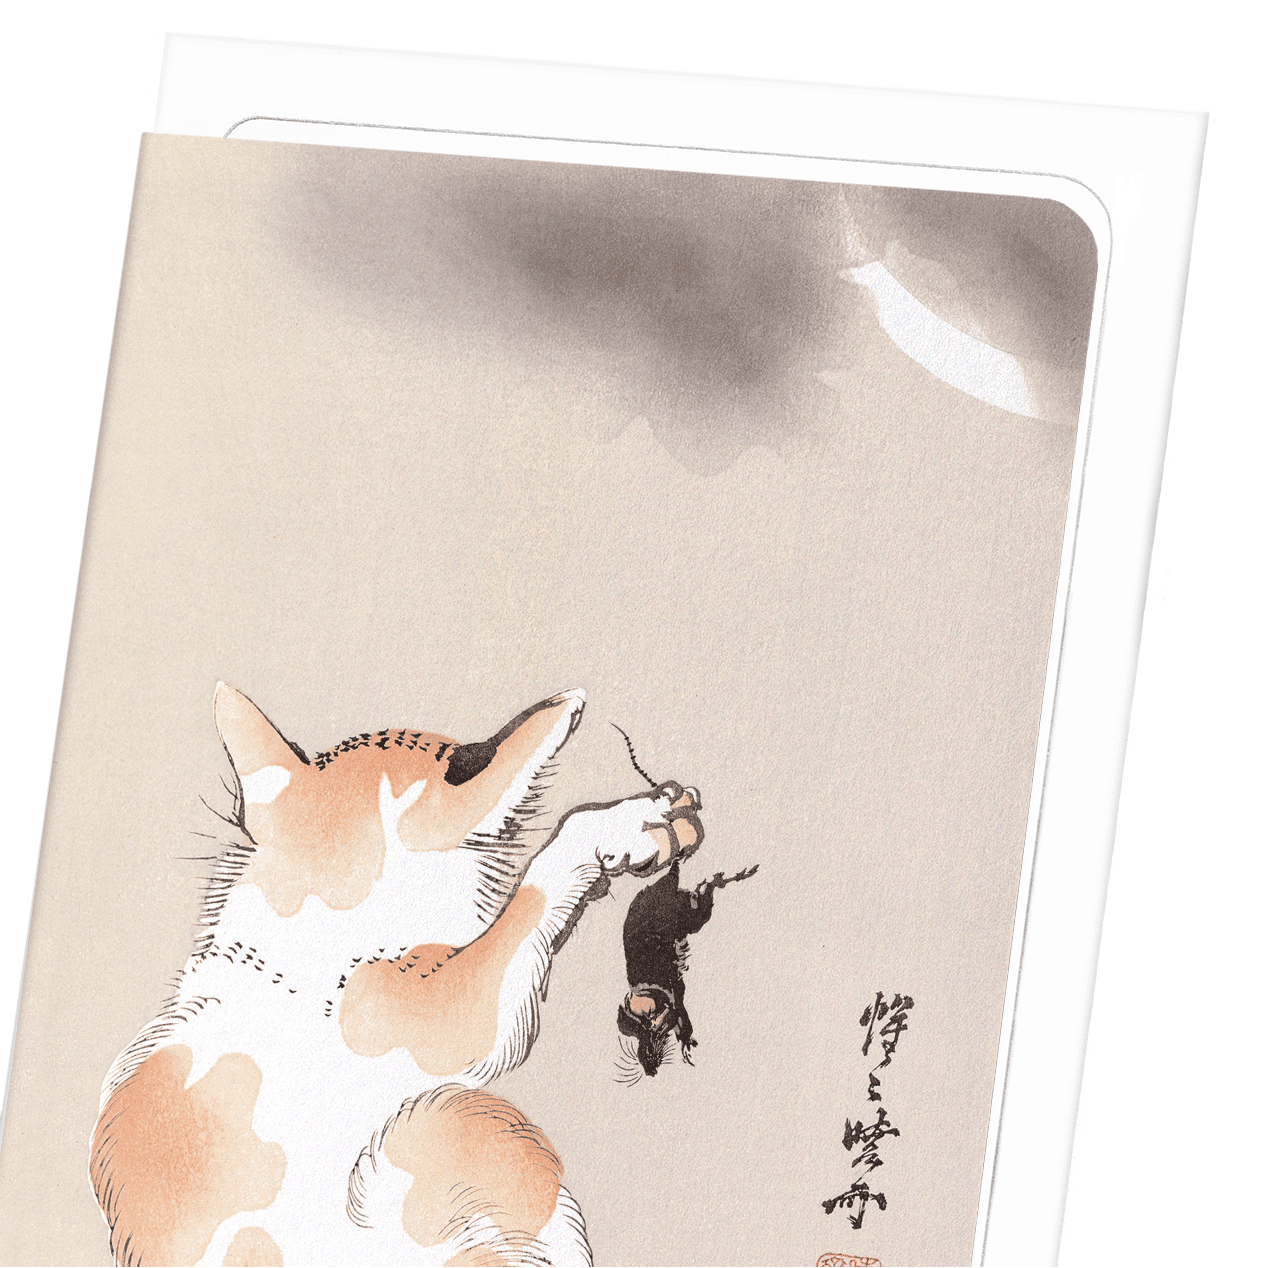 CAT WITH MOUSE (C.1870): Japanese Greeting Card